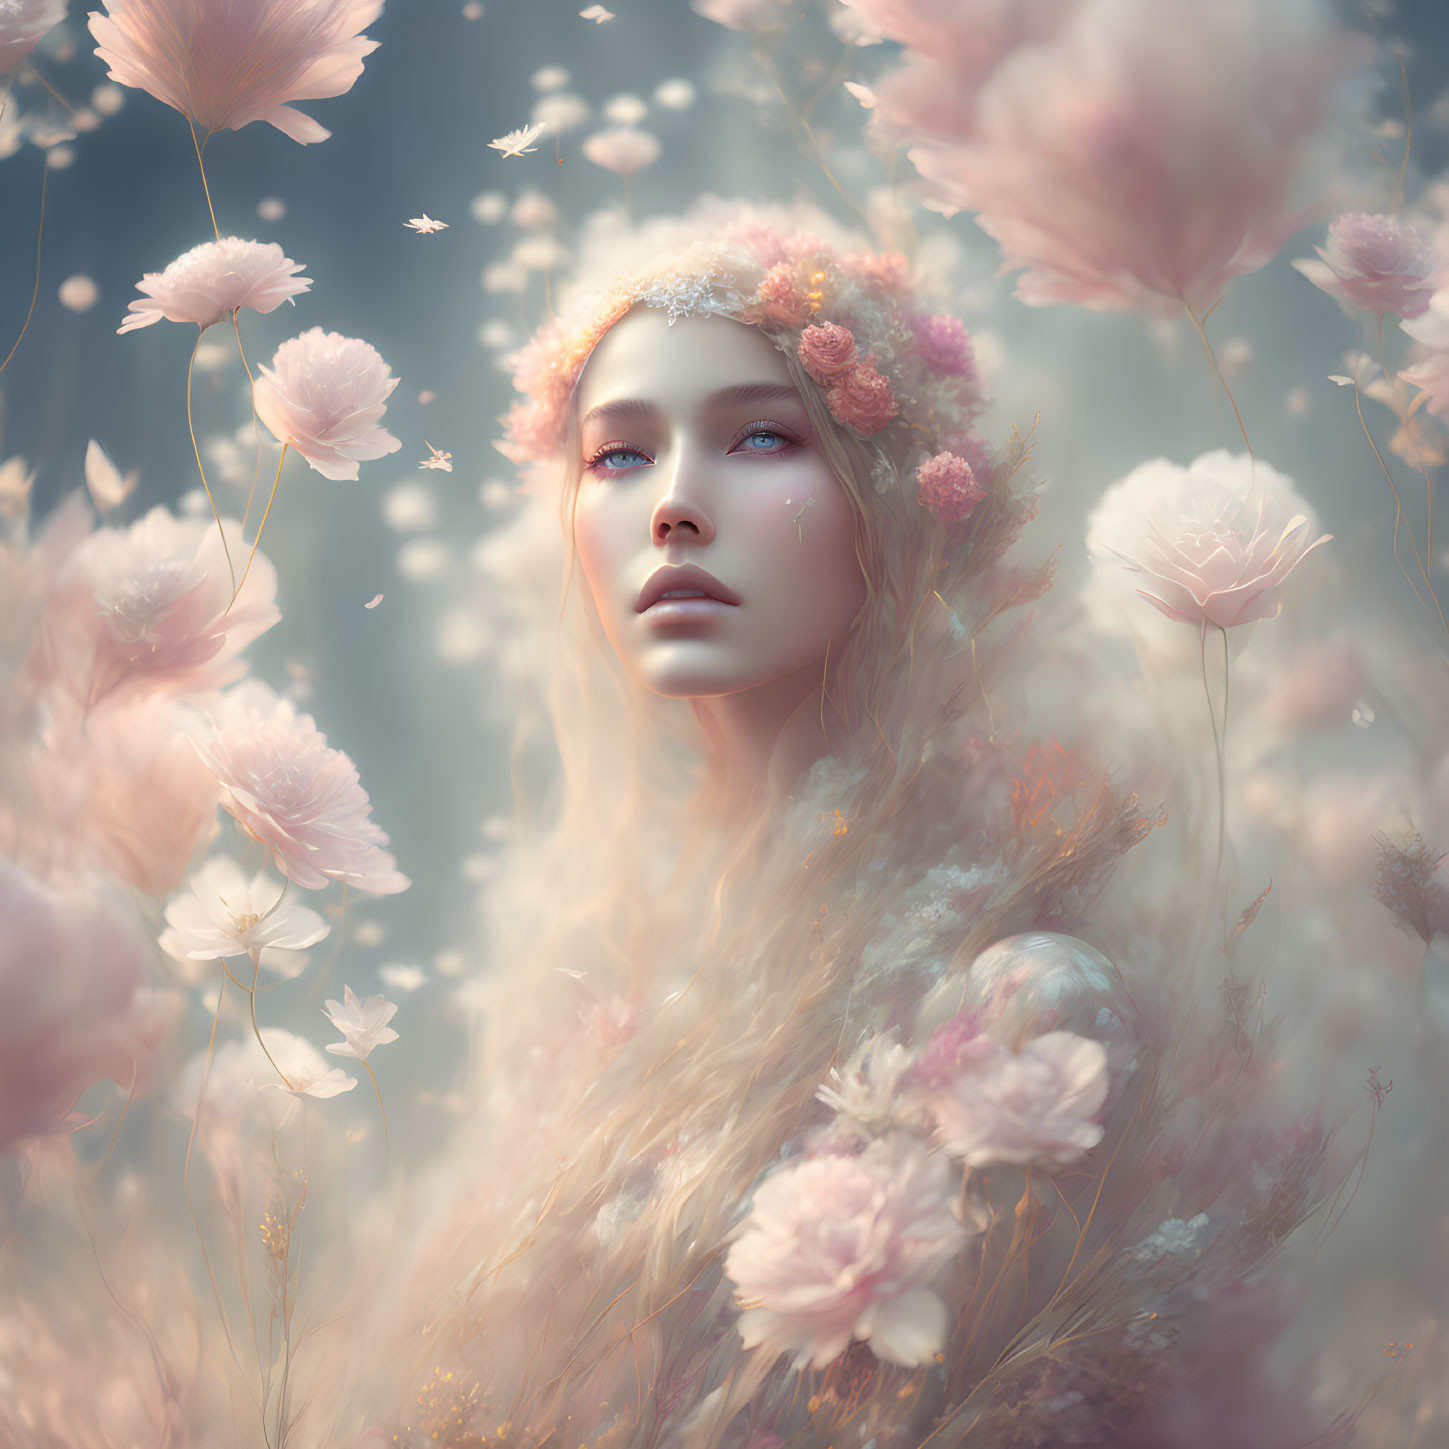 Woman portrait with soft pink flowers and floral hair adornments on dreamy background